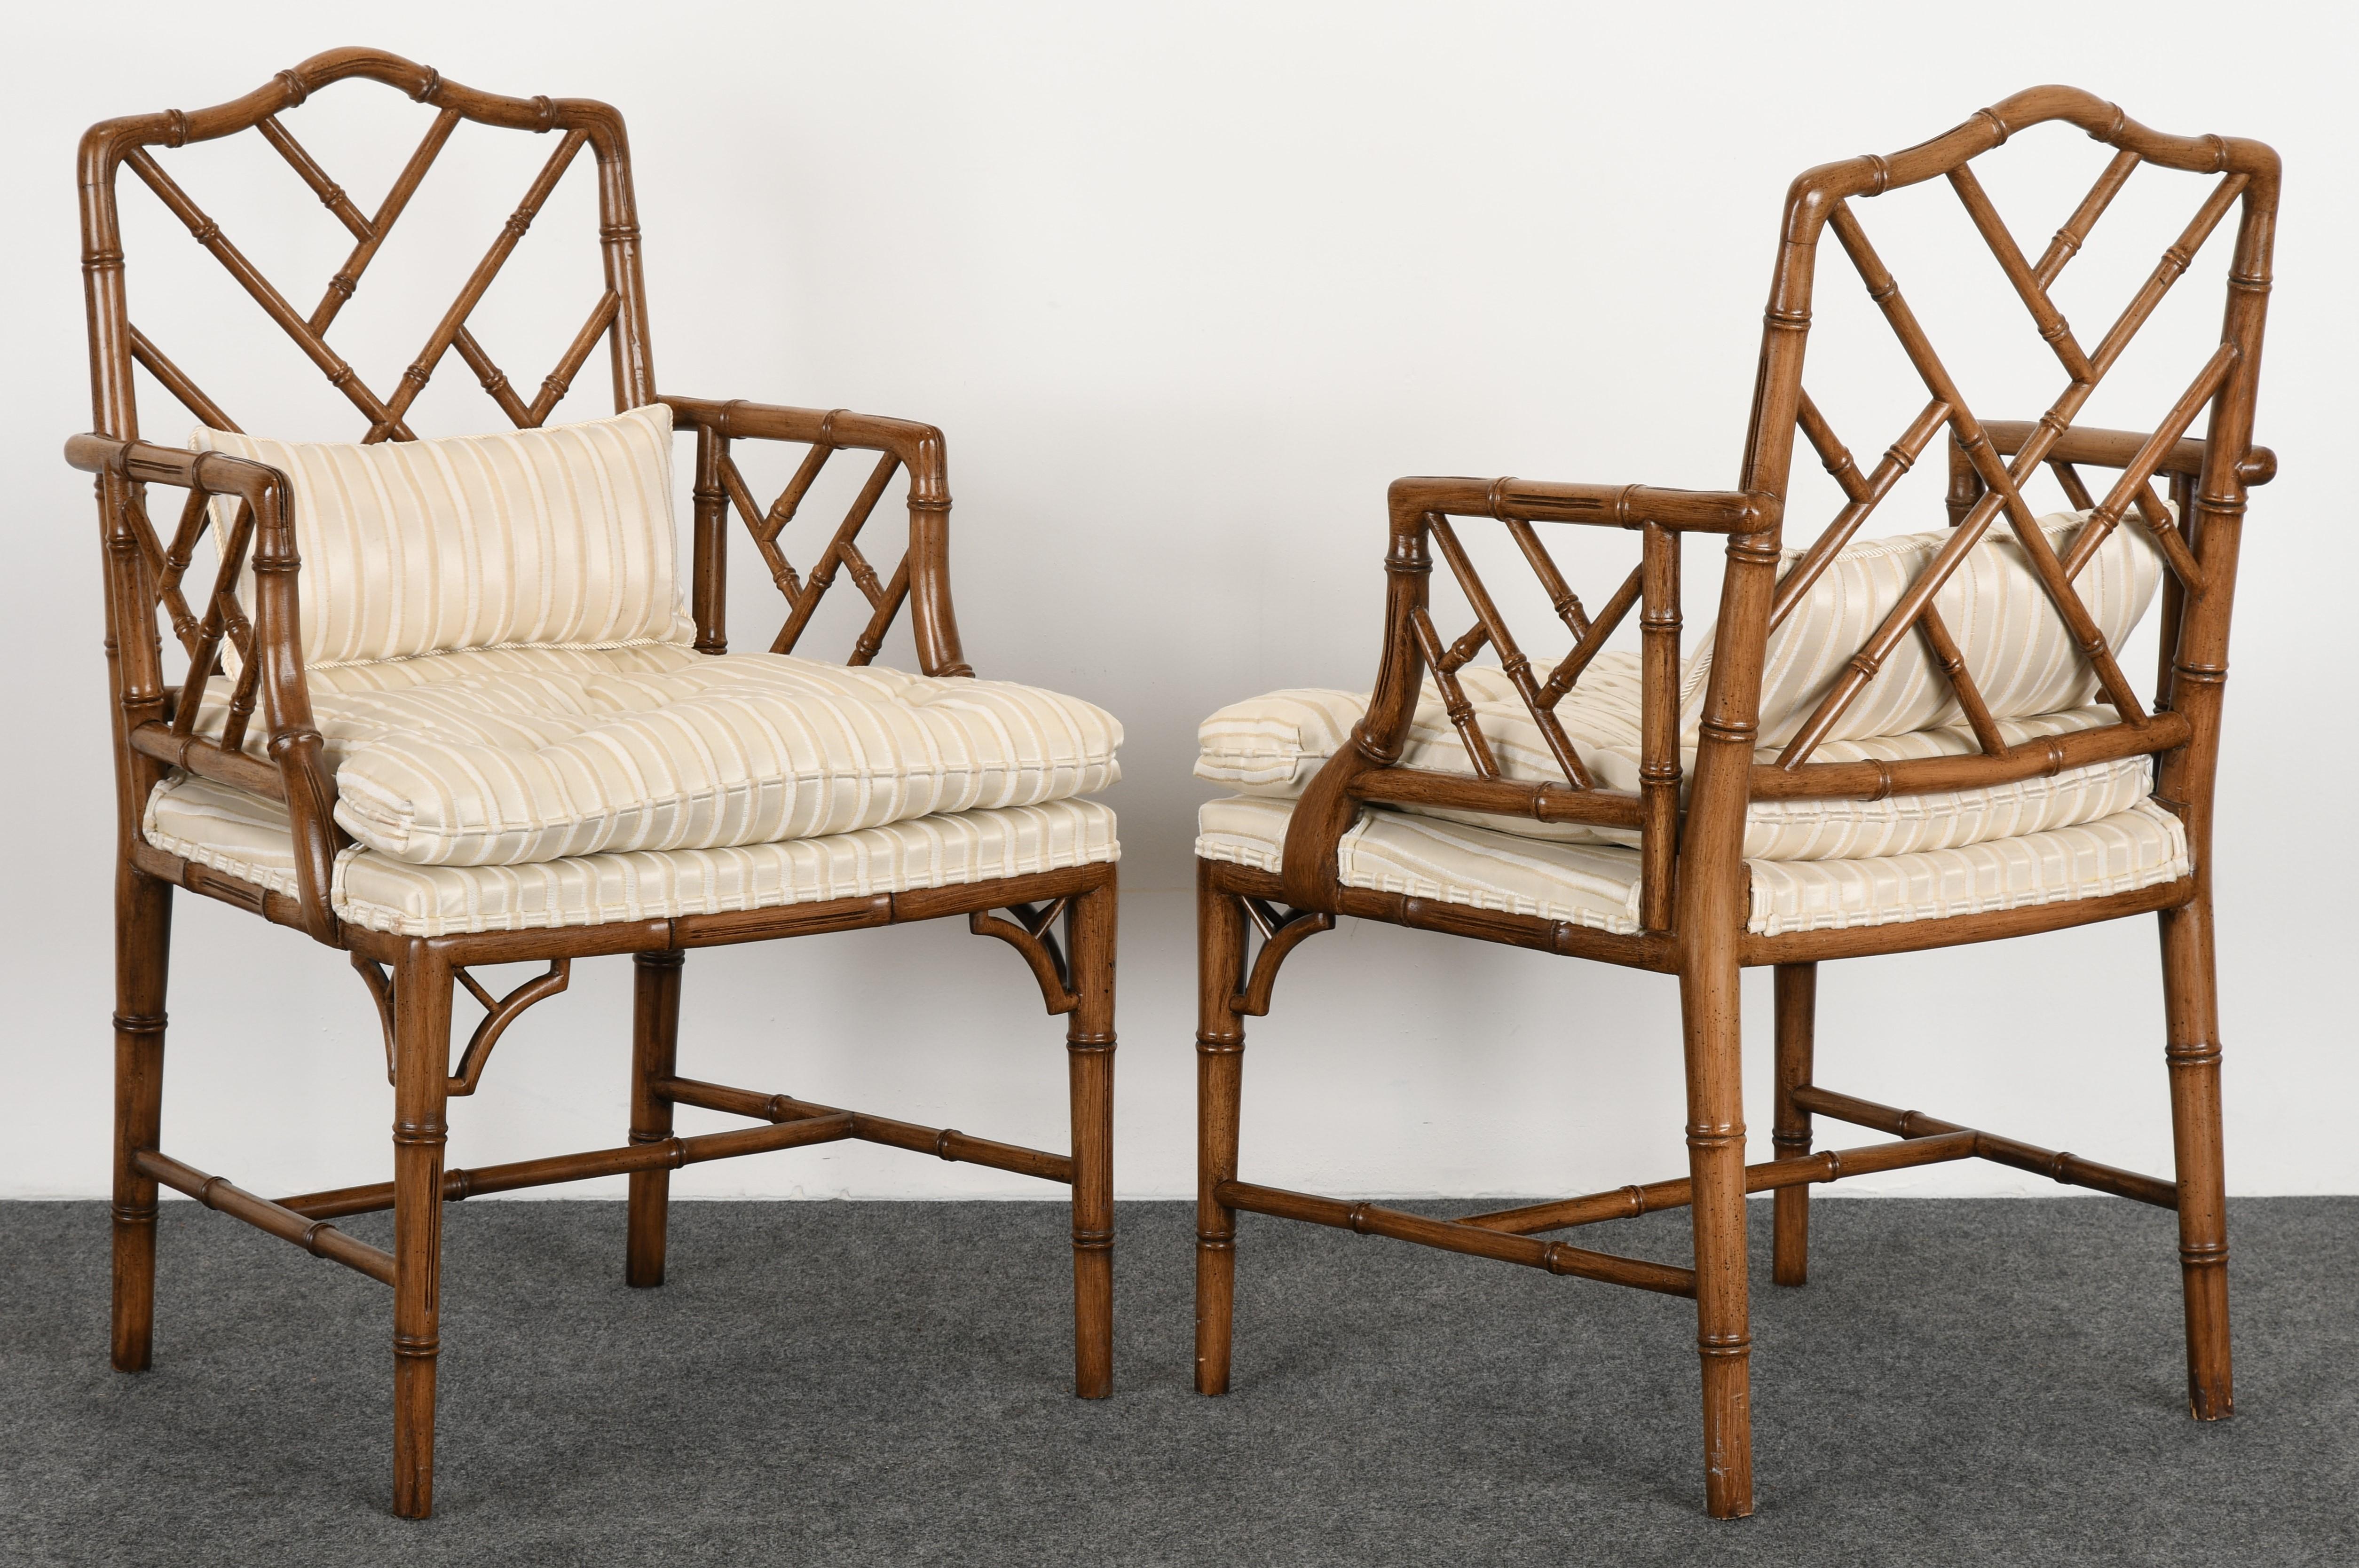 A pair of decorative stained maple faux bamboo armchairs. The chairs have a Classic trellis back and arms, with Asian motif and elegant tapered legs. The chairs are structurally sound. New fabric recommended.

Dimensions: 36.75